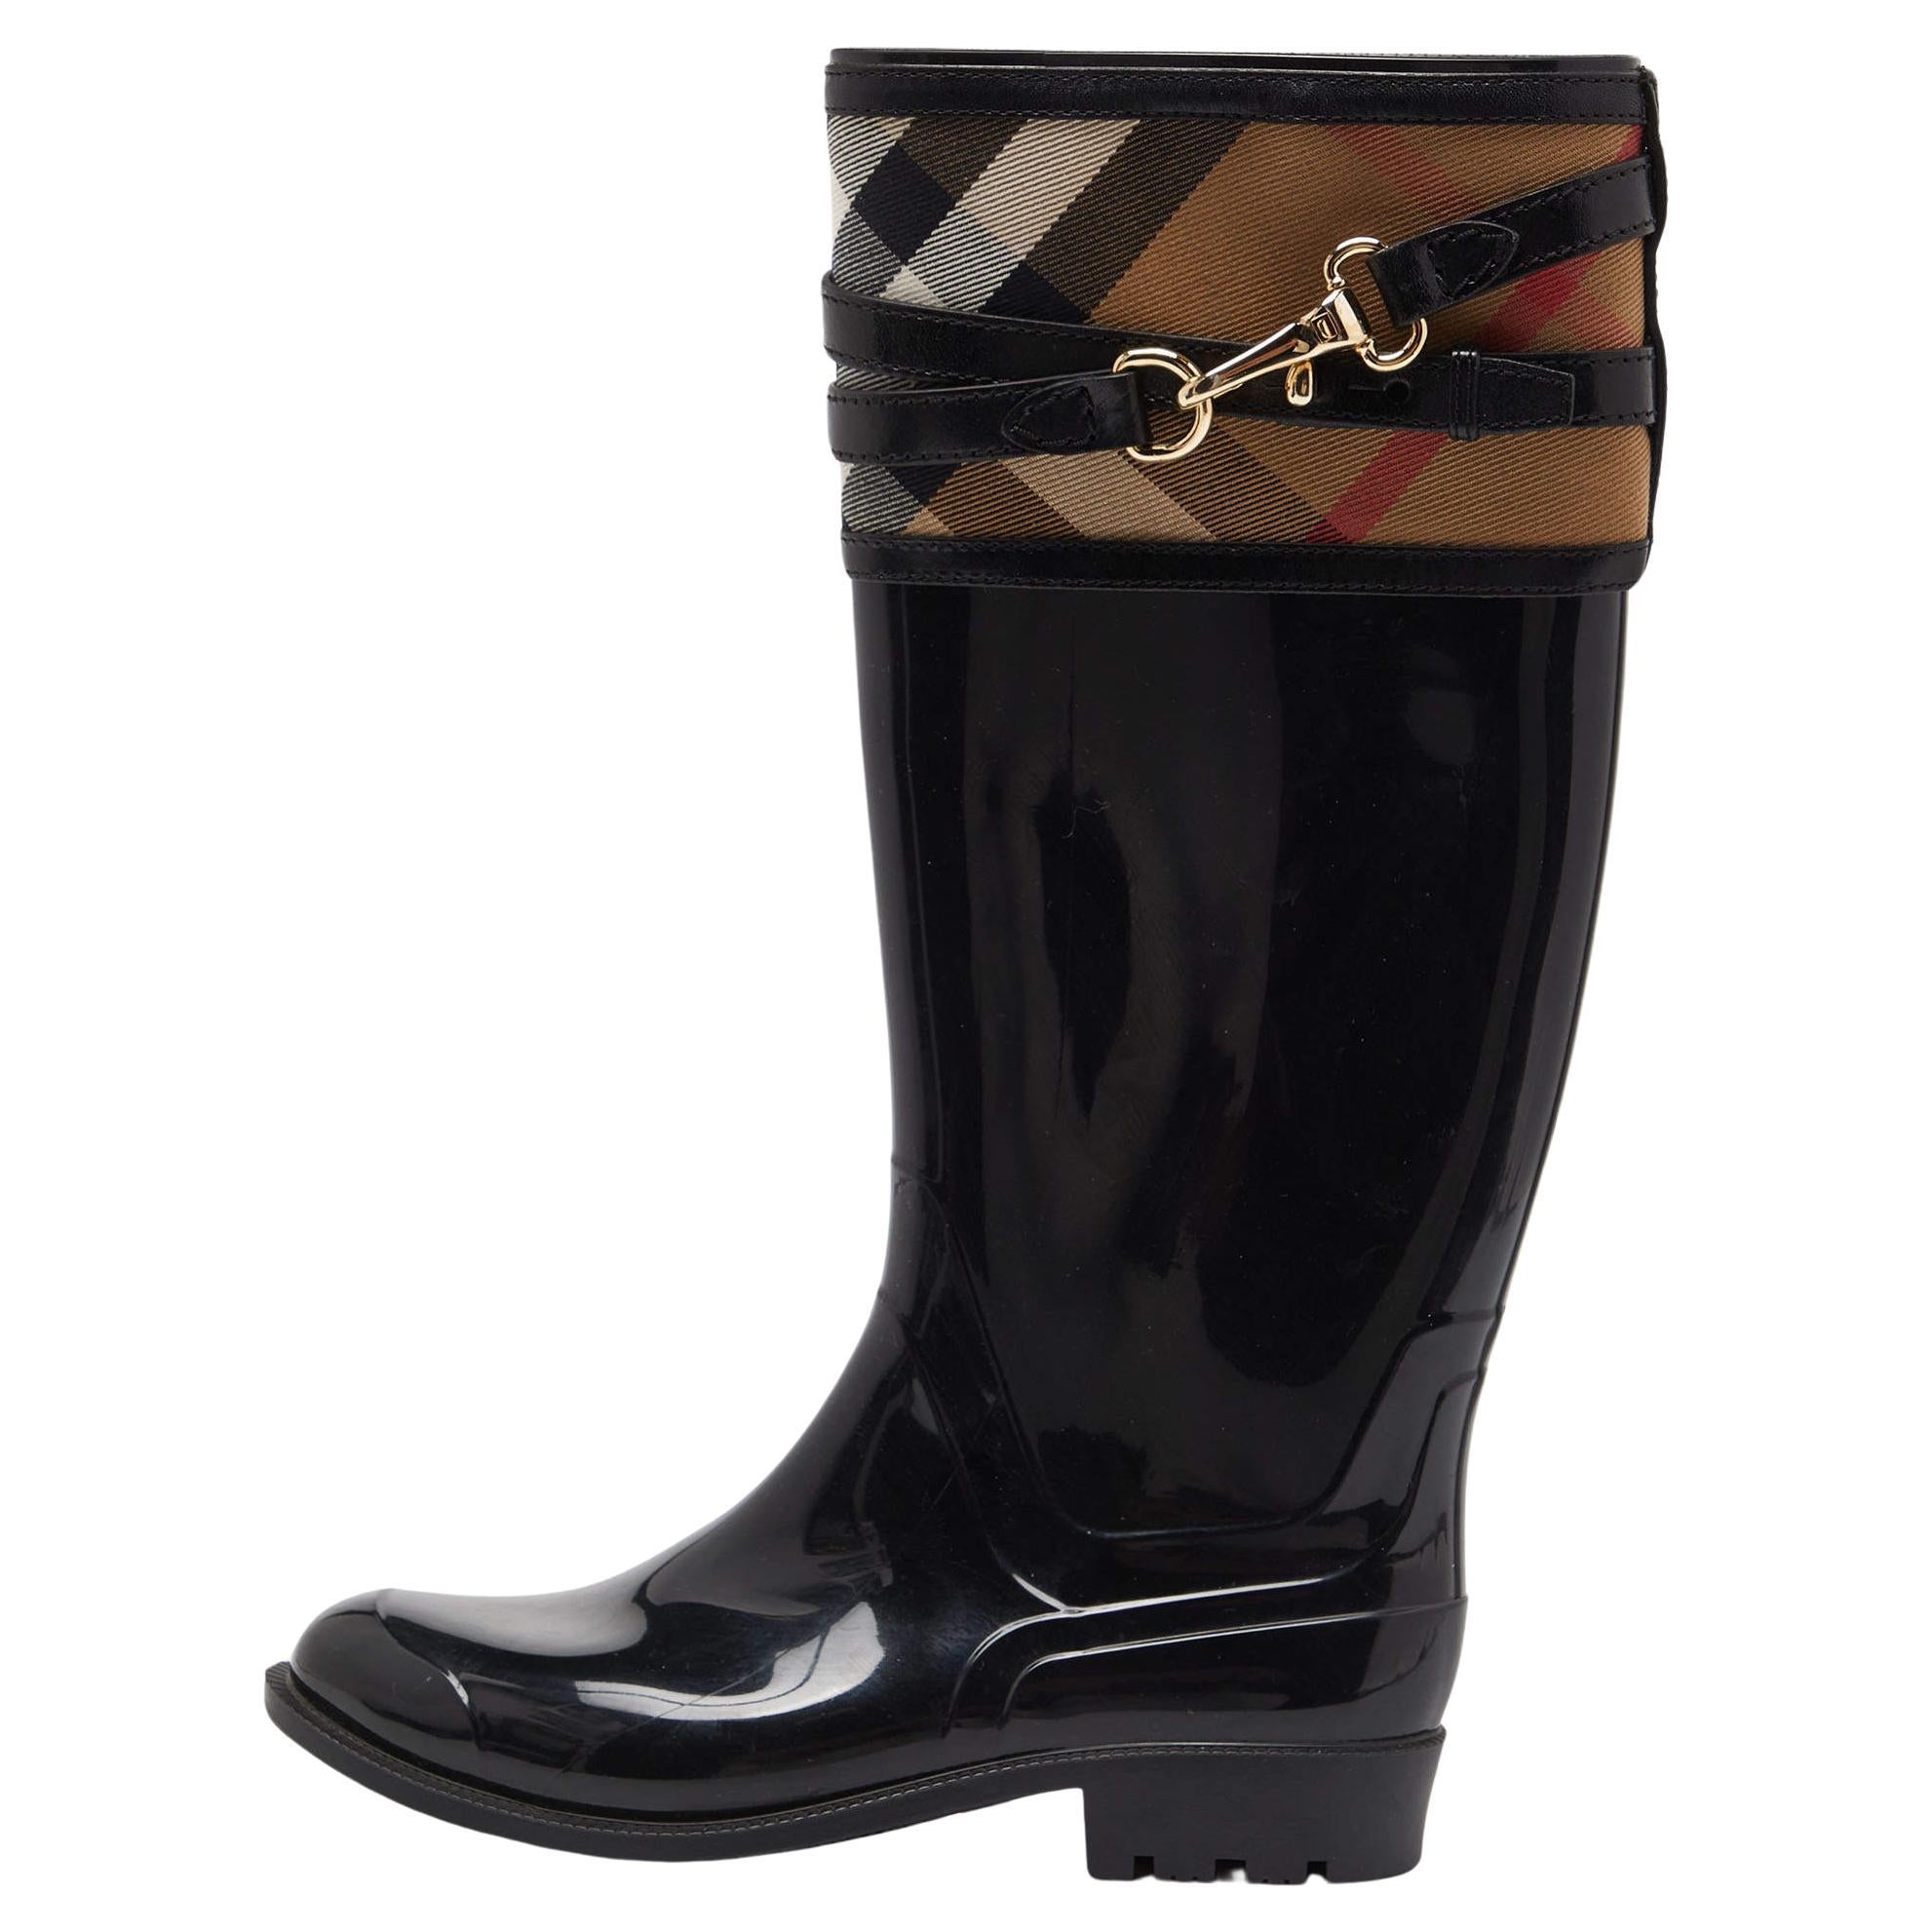 Burberry Black/Beige Patent Leather and House Check Canvas Knee Length Boots Siz For Sale